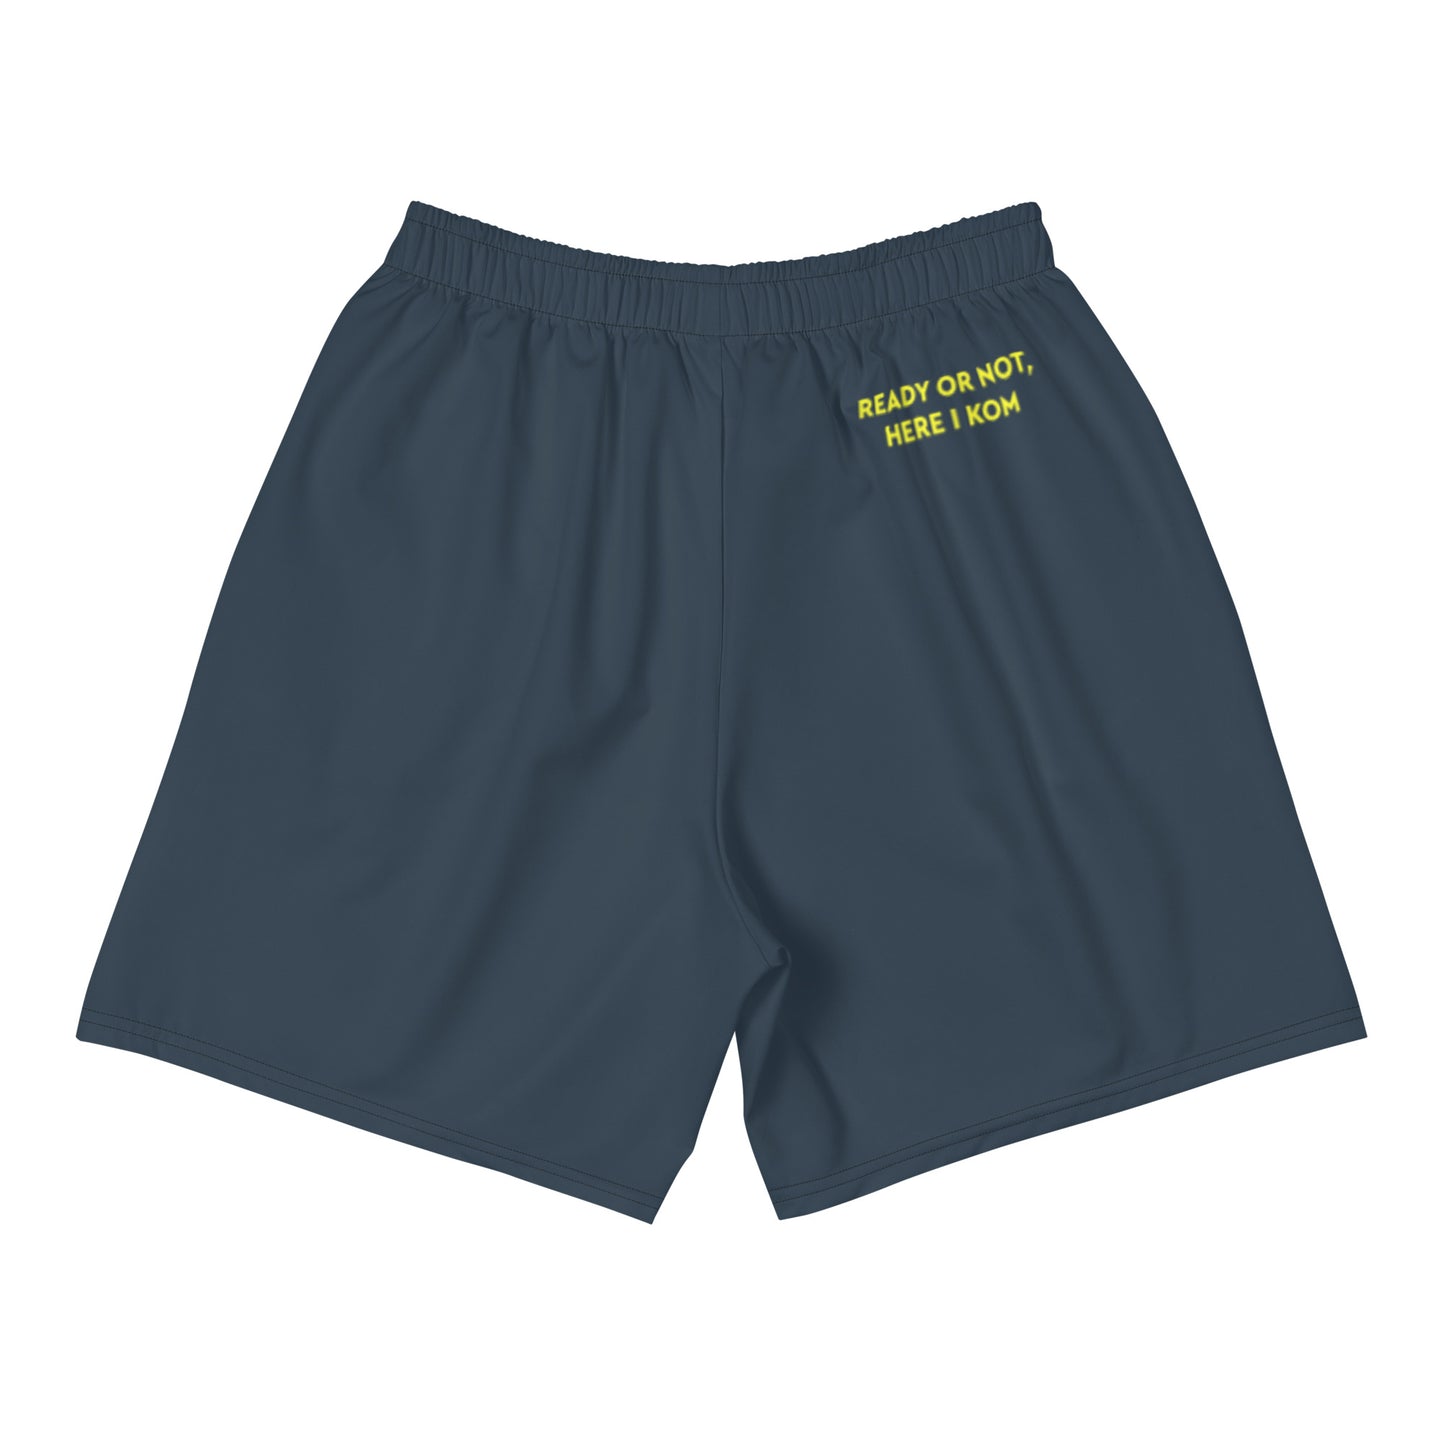 Ready Or Not, Here I KOM, Cyclists Fitness Shorts, Adult